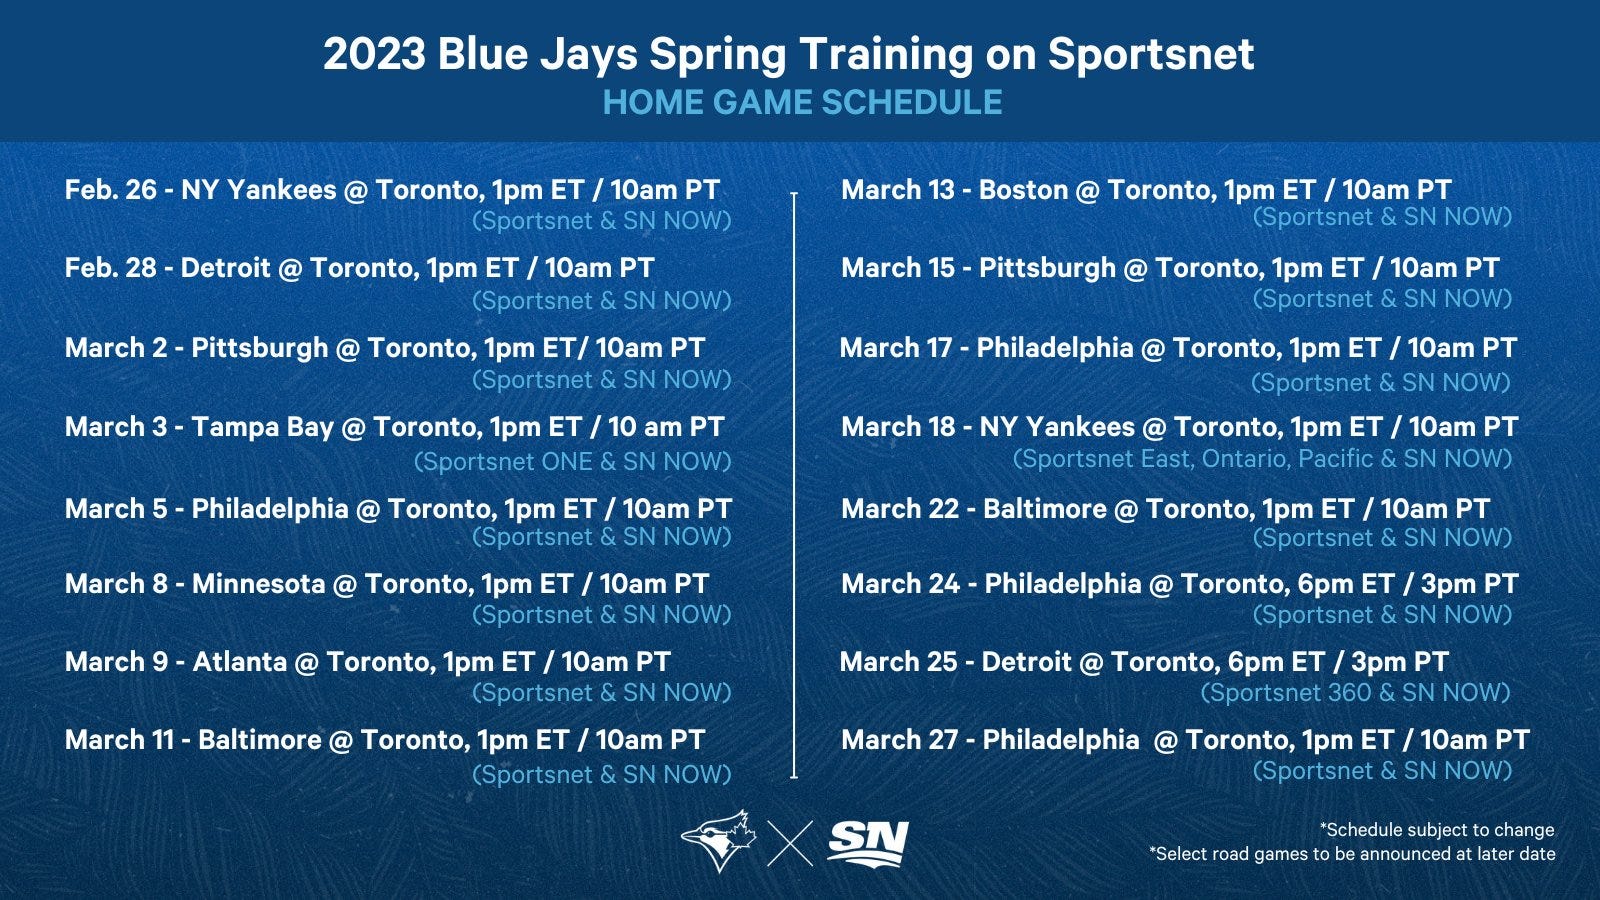 Blue Jays Spring TV schedule (all games at 1PM ET unless otherwise noted): Feb. 26 - vs. NYY, Feb. 28 - vs. DET, Mar. 2 - vs. PIT, Mar. 3 - vs. TBR, Mar. 5 - vs. PHI, Mar. 8 - vs. MIN, Mar. 11 - vs. BAL, Mar. 13 - vs. BOS, Mar. 15 - vs. PIT, Mar. 17 - vs. PHI, Mar. 18 - vs. NYY, Mar. 22 - vs. BAL, Mar. 24 - vs. PHI (6PM ET), Mar. 25 - vs. DET (6PM ET), Mar. 27 - vs. PHI